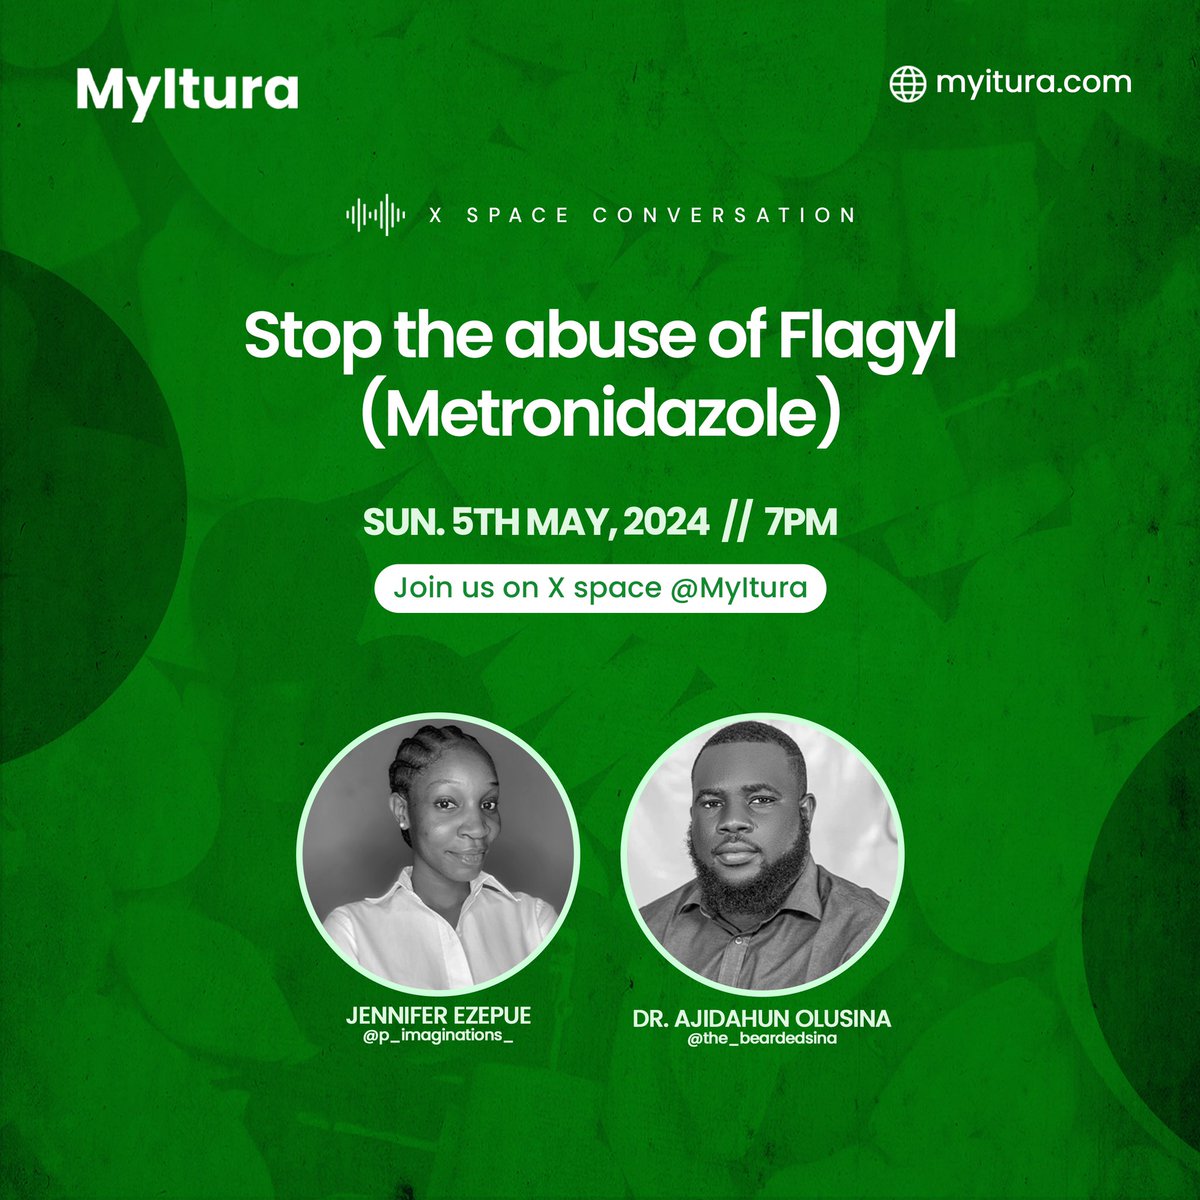 On the 5th of May, @the_beardedsina would be joining MyItura’s X space conversation to educate us on the proper use of Flagyl(Metronidazole).

🚨We would also be picking our winners for this week from the space. Make sure you don’t miss this❗️

⚠️You can set a reminder using the